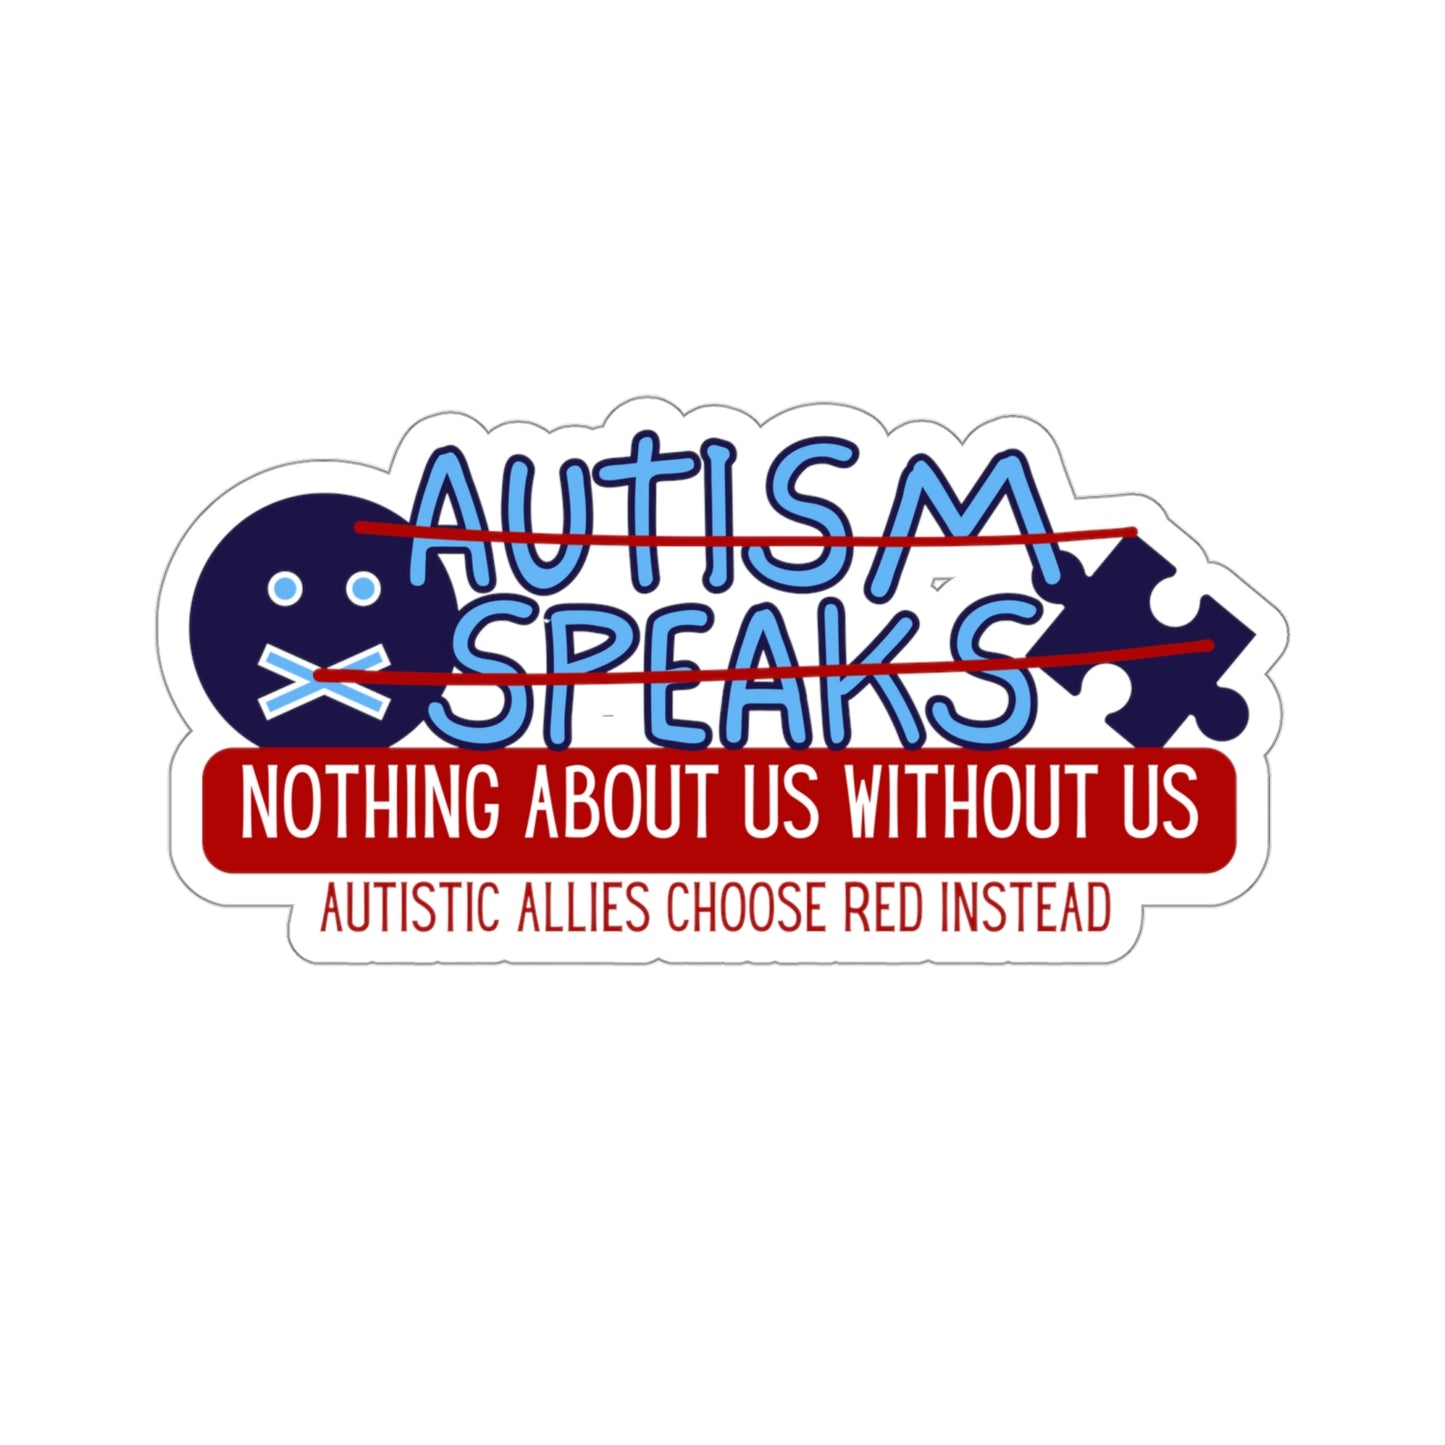 Say No to Autism Speaks Kiss-Cut Stickers